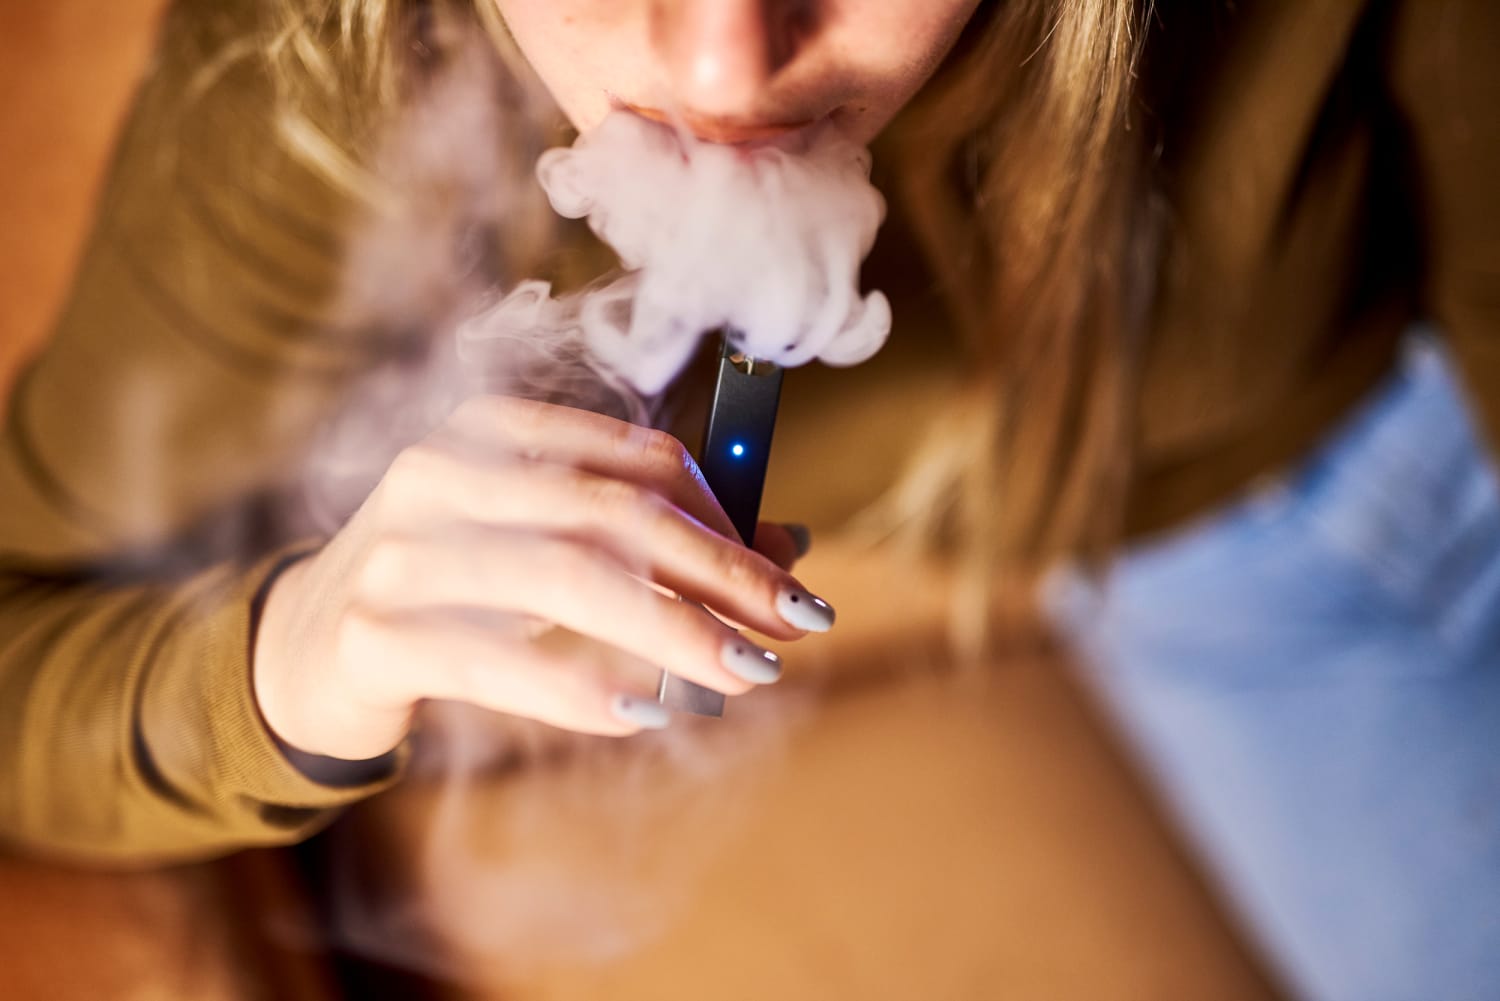 Policy needs to change': Study finds teen THC vaping doubled in last 8  years